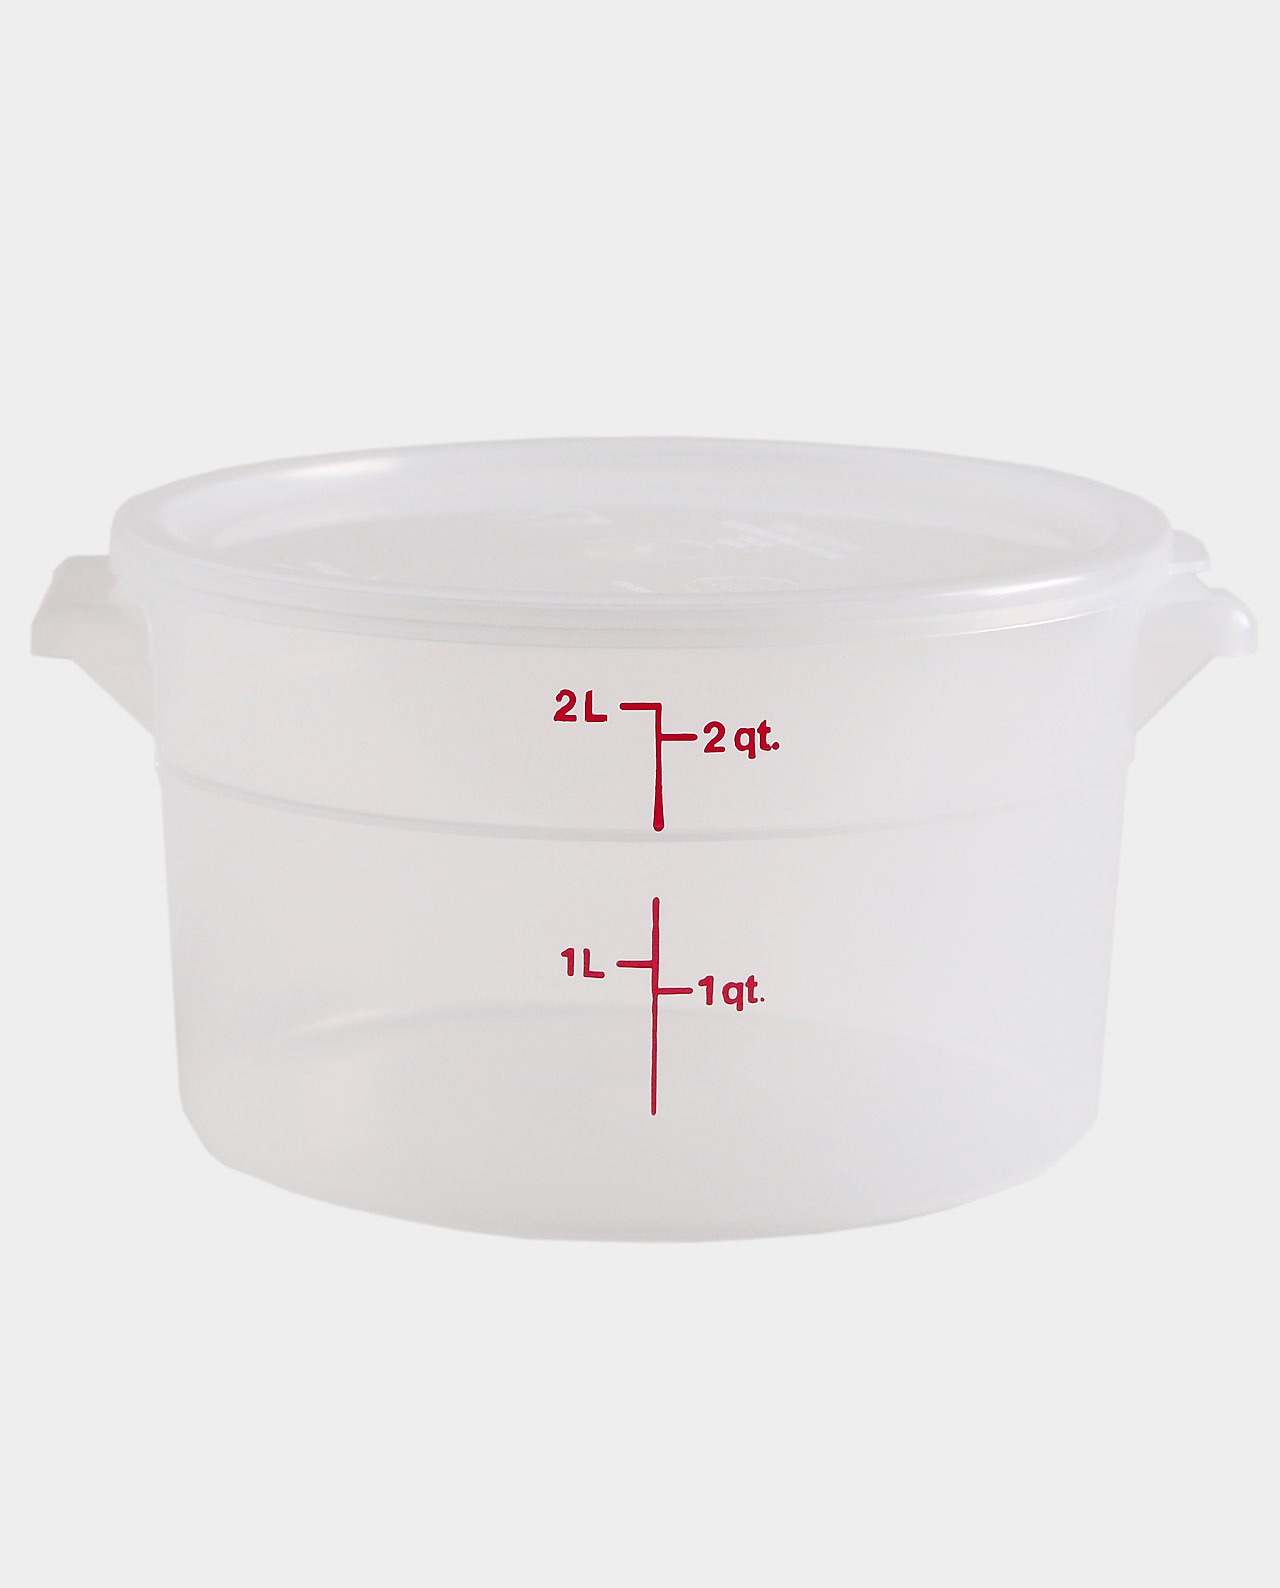 Dough Rising and Storage Bucket w/Lid - 2 qt. Round